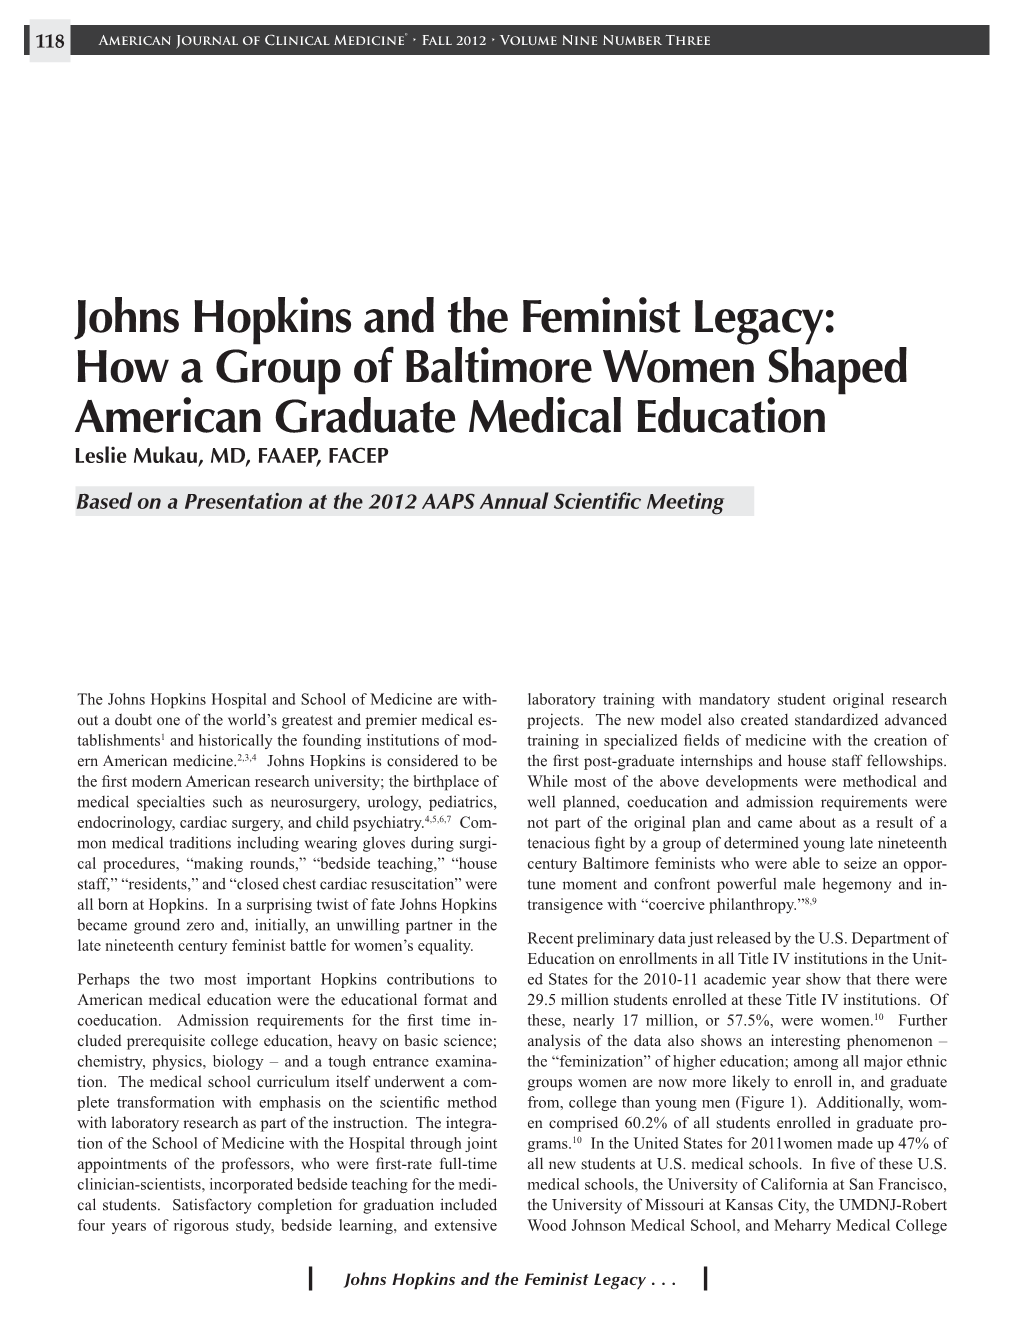 Johns Hopkins and the Feminist Legacy: How a Group of Baltimore Women Shaped American Graduate Medical Education Leslie Mukau, MD, FAAEP, FACEP